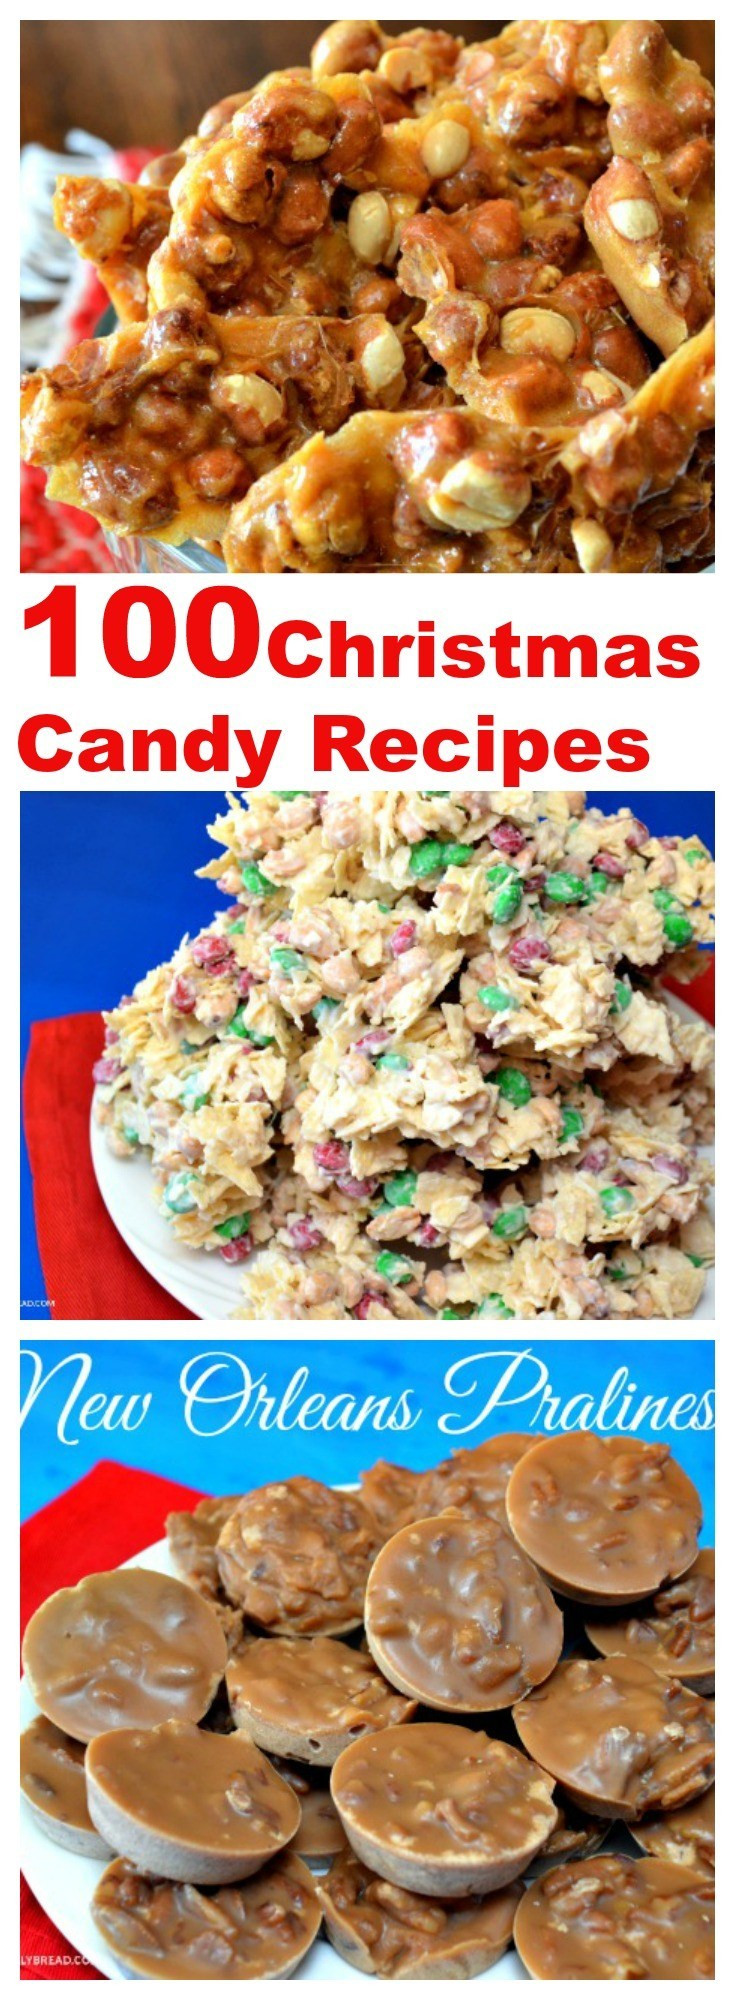 Favorite Christmas Candy
 BEST CHRISTMAS CANDY RECIPES ROUNDUP